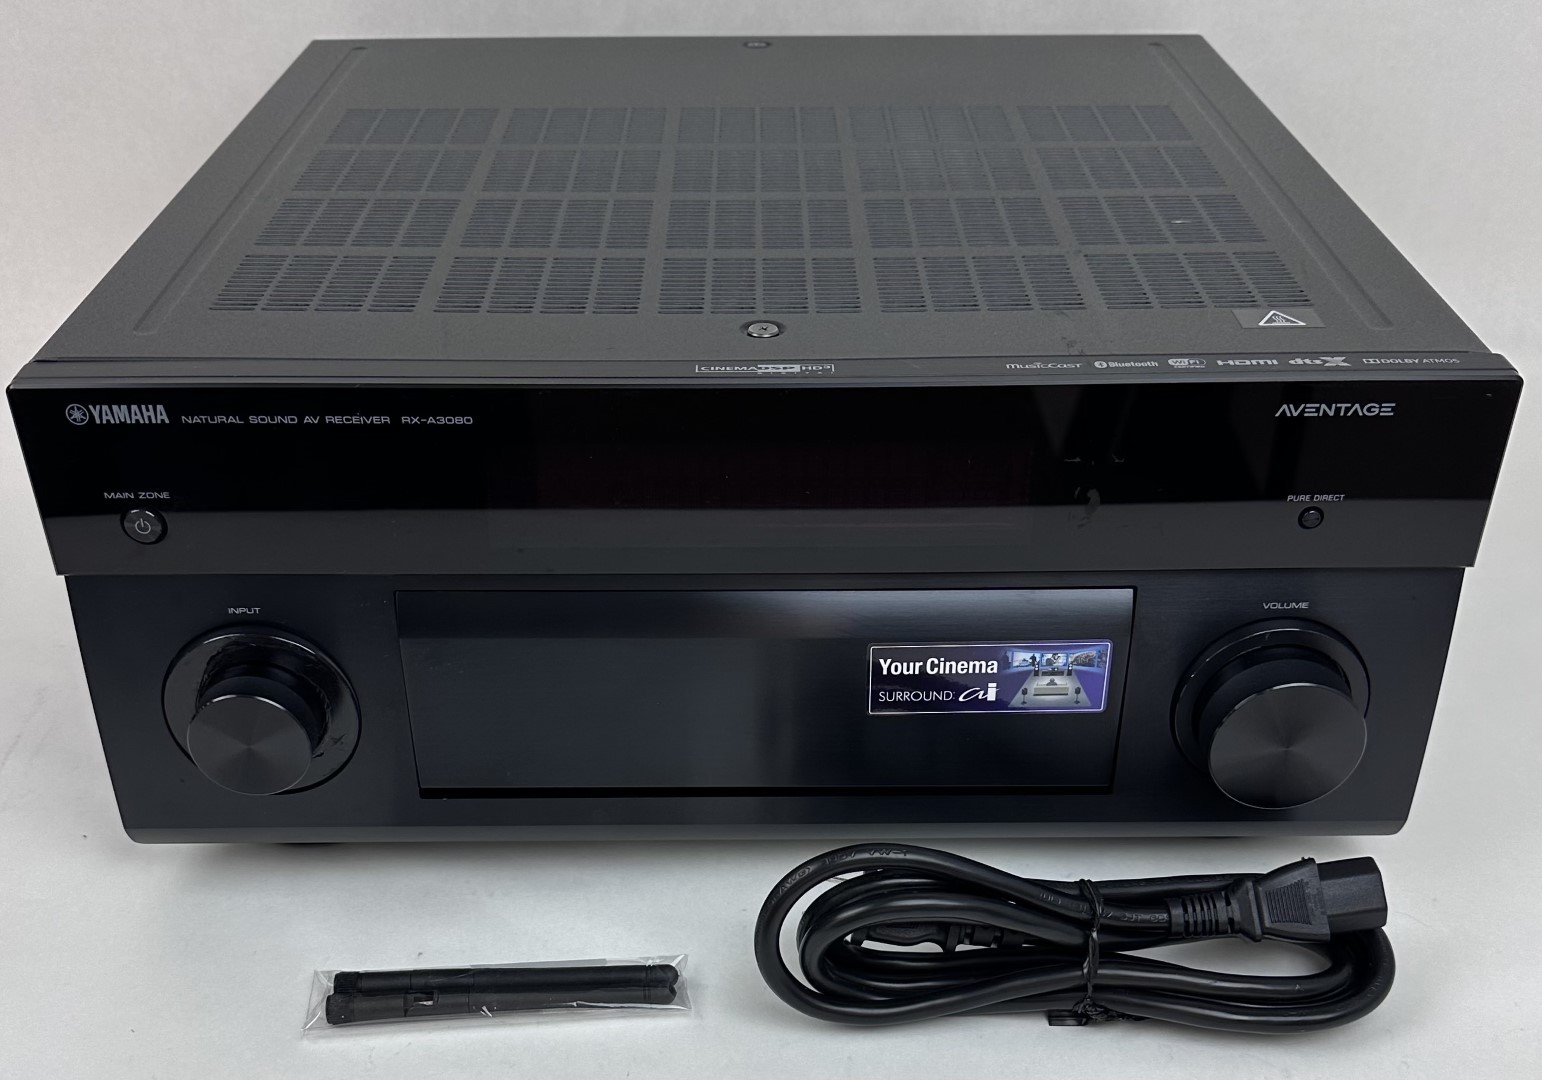 Yamaha AVENTAGE RX-A3080 9.2-Channel AV Receiver with MusicCast